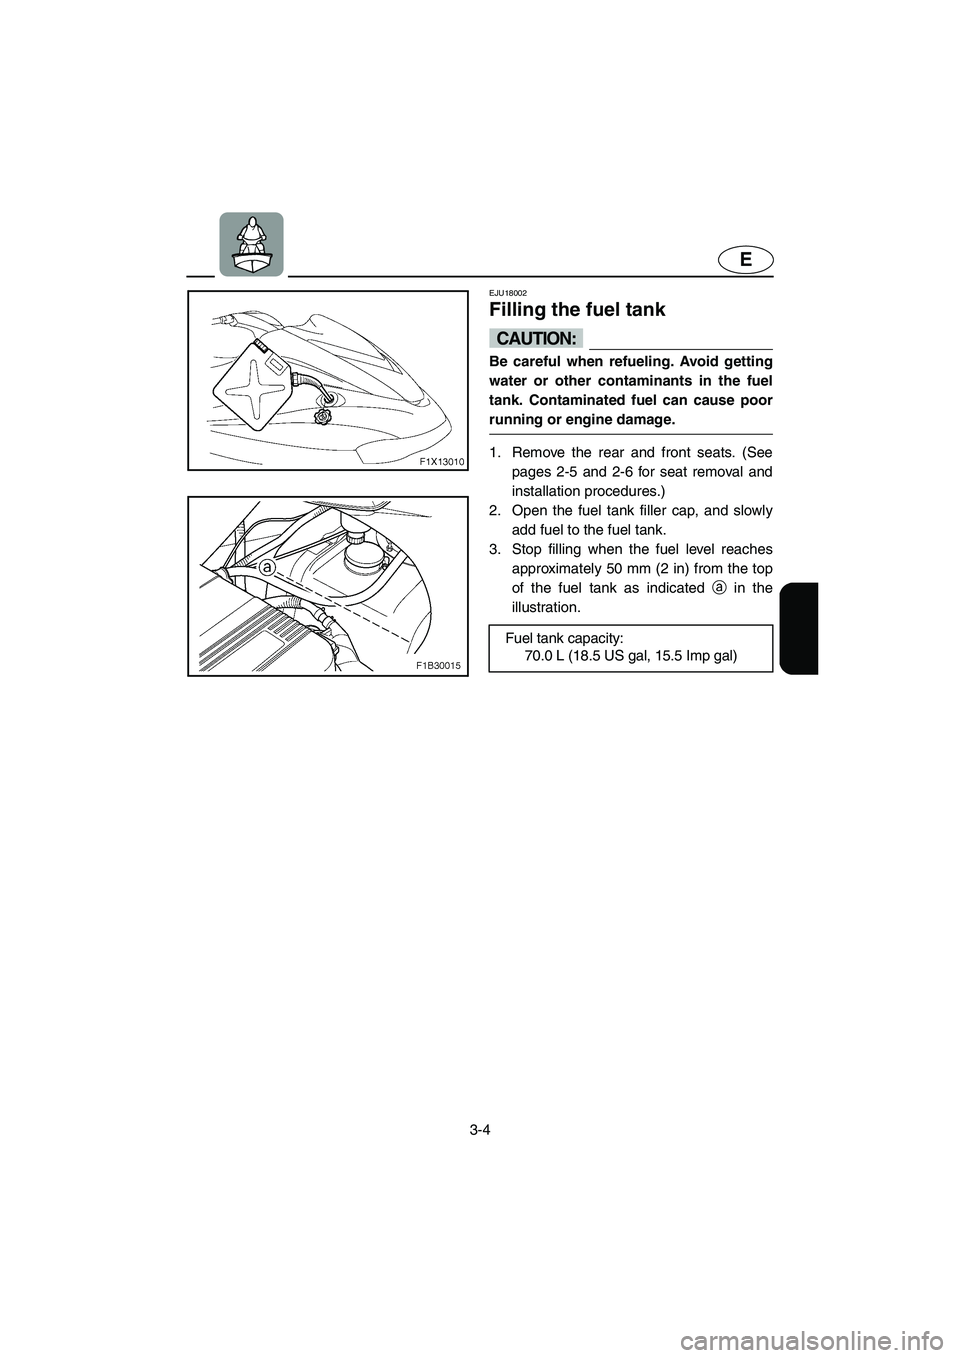 YAMAHA FX CRUISER 2006  Owners Manual 3-4
E
EJU18002
Filling the fuel tank 
CAUTION:@ Be careful when refueling. Avoid getting
water or other contaminants in the fuel
tank. Contaminated fuel can cause poor
running or engine damage. 
@
1. 